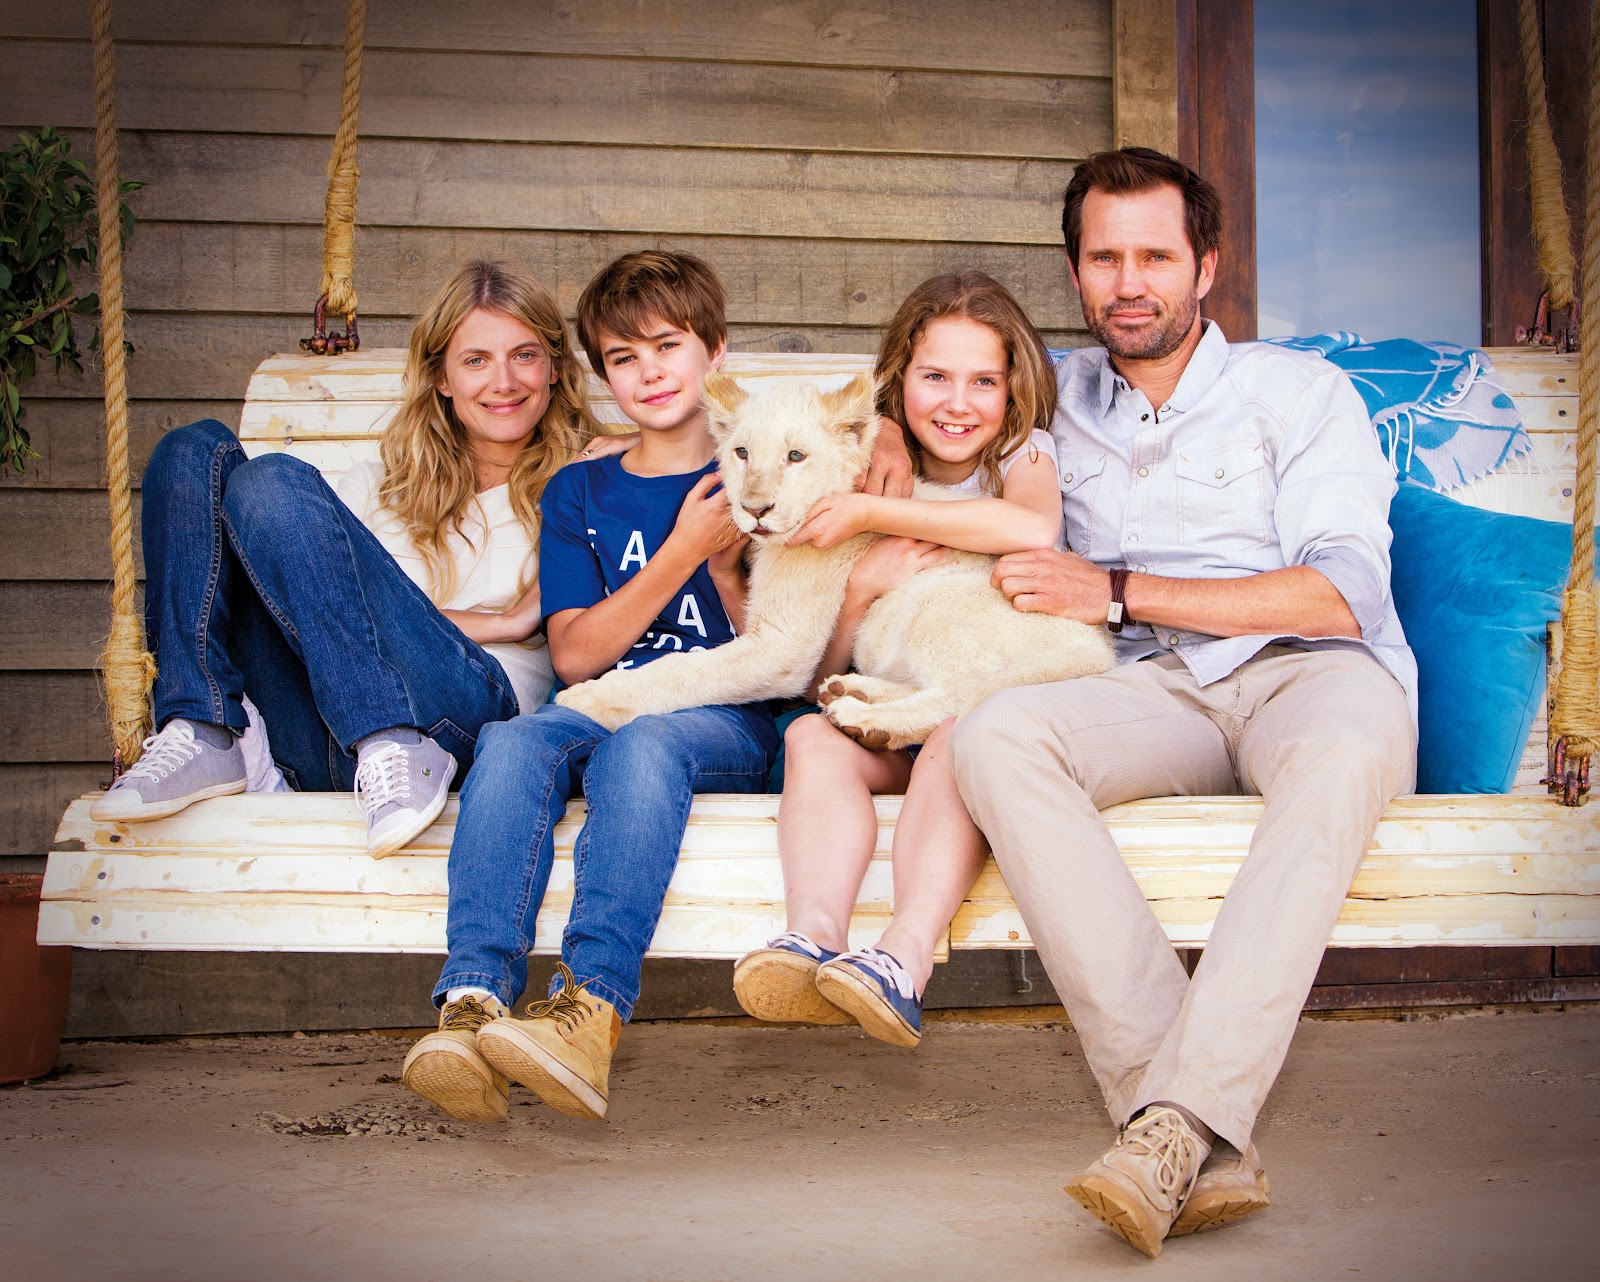 Still from Mia and the White Lion, starring Daniah De Villiers, Mélanie Laurent, Langley Kirkwood, and Ryan Mac Lennan.